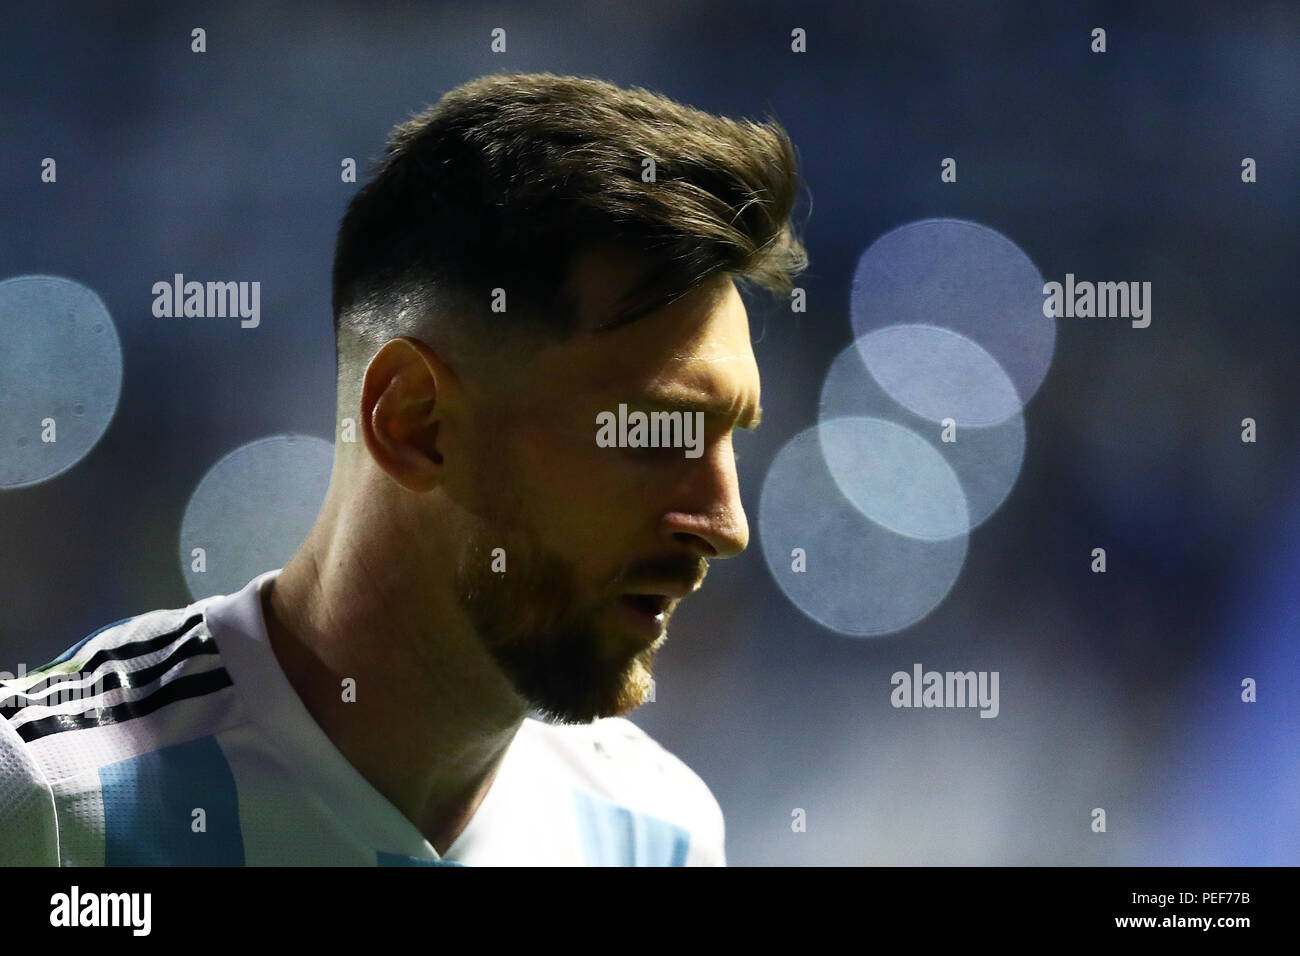 BUENOS AIRES, ARGENTINA - MAY 2018: Lionel Messi Stock Photo